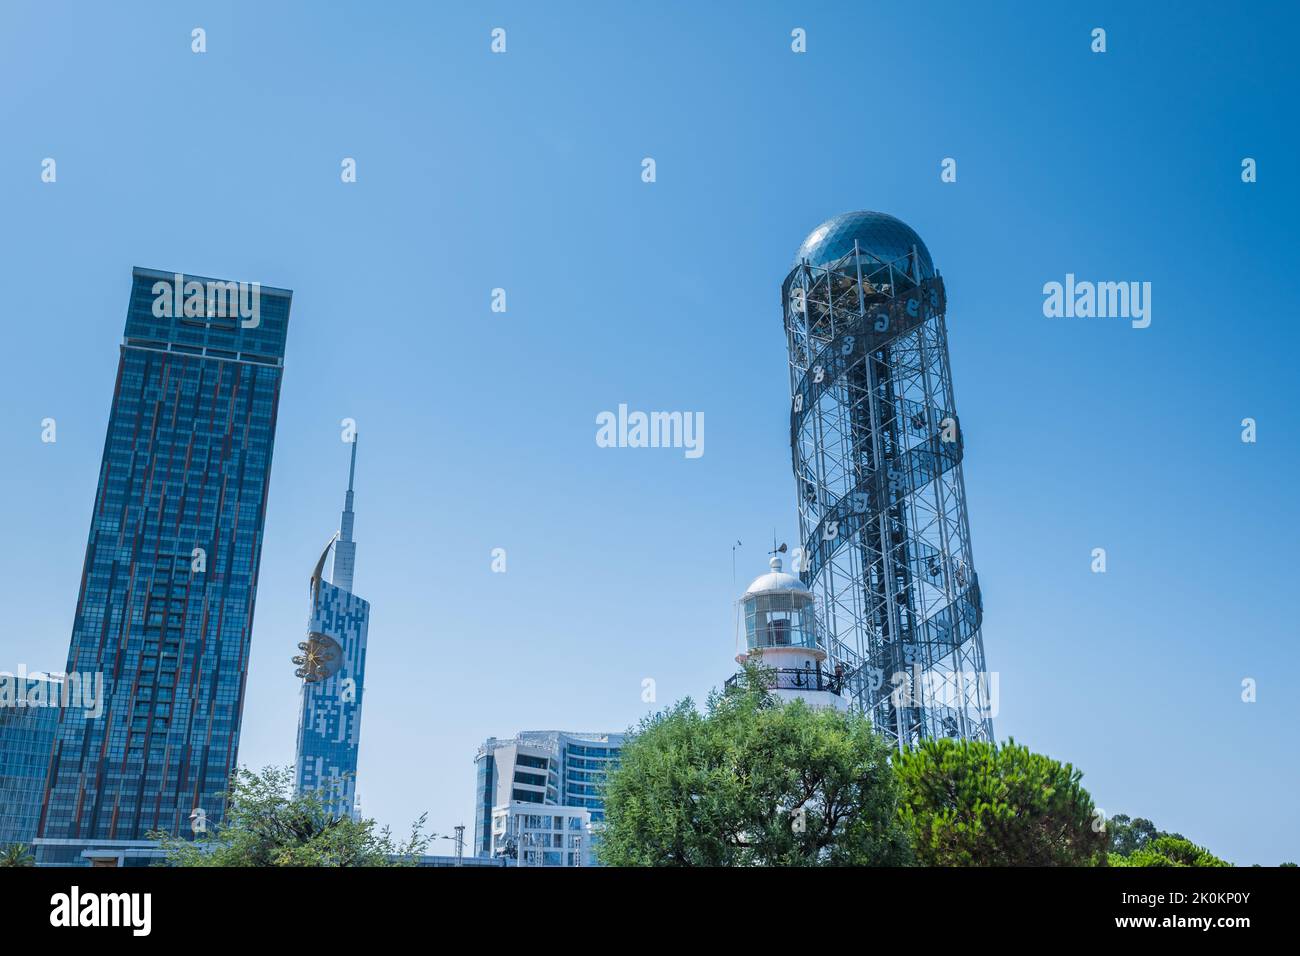 Alphabetic Tower in Batumi. Batumi cityscape with the iconic Alphabet tower and skyscrapers in summer. Stock Photo